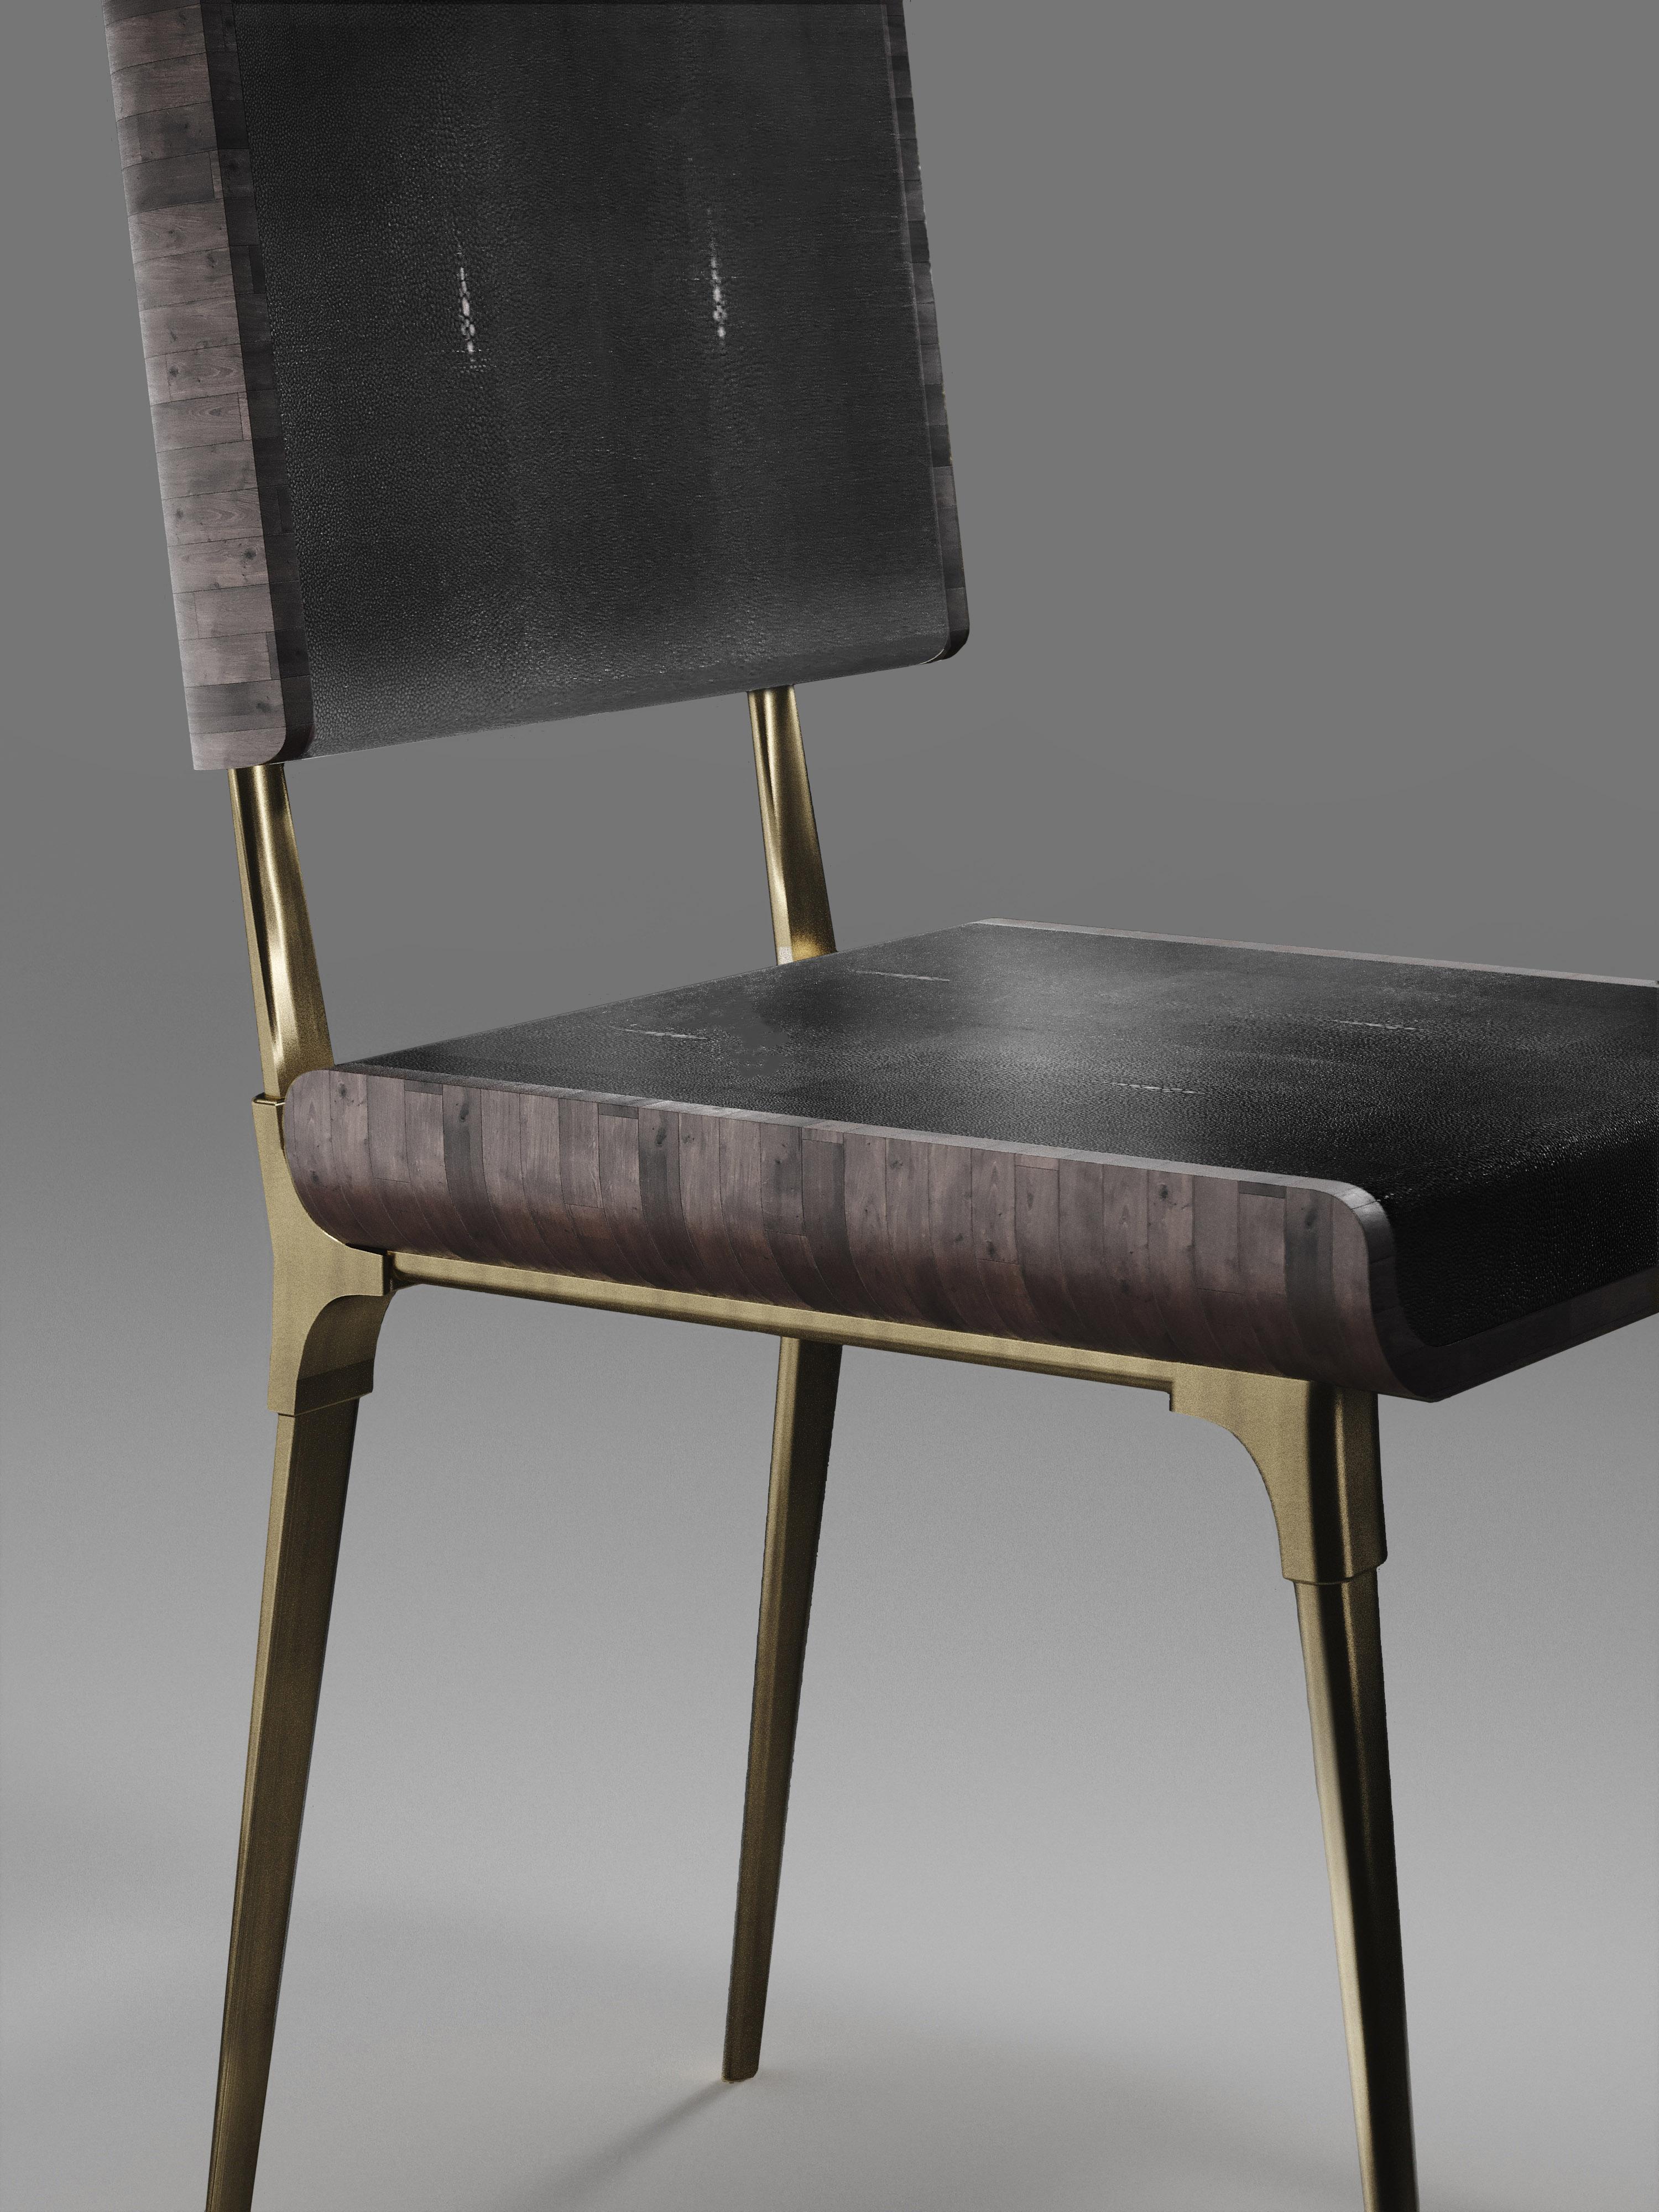 Shagreen Chair with Palmwood and Bronze-Patina Brass Details by Kifu Paris For Sale 1